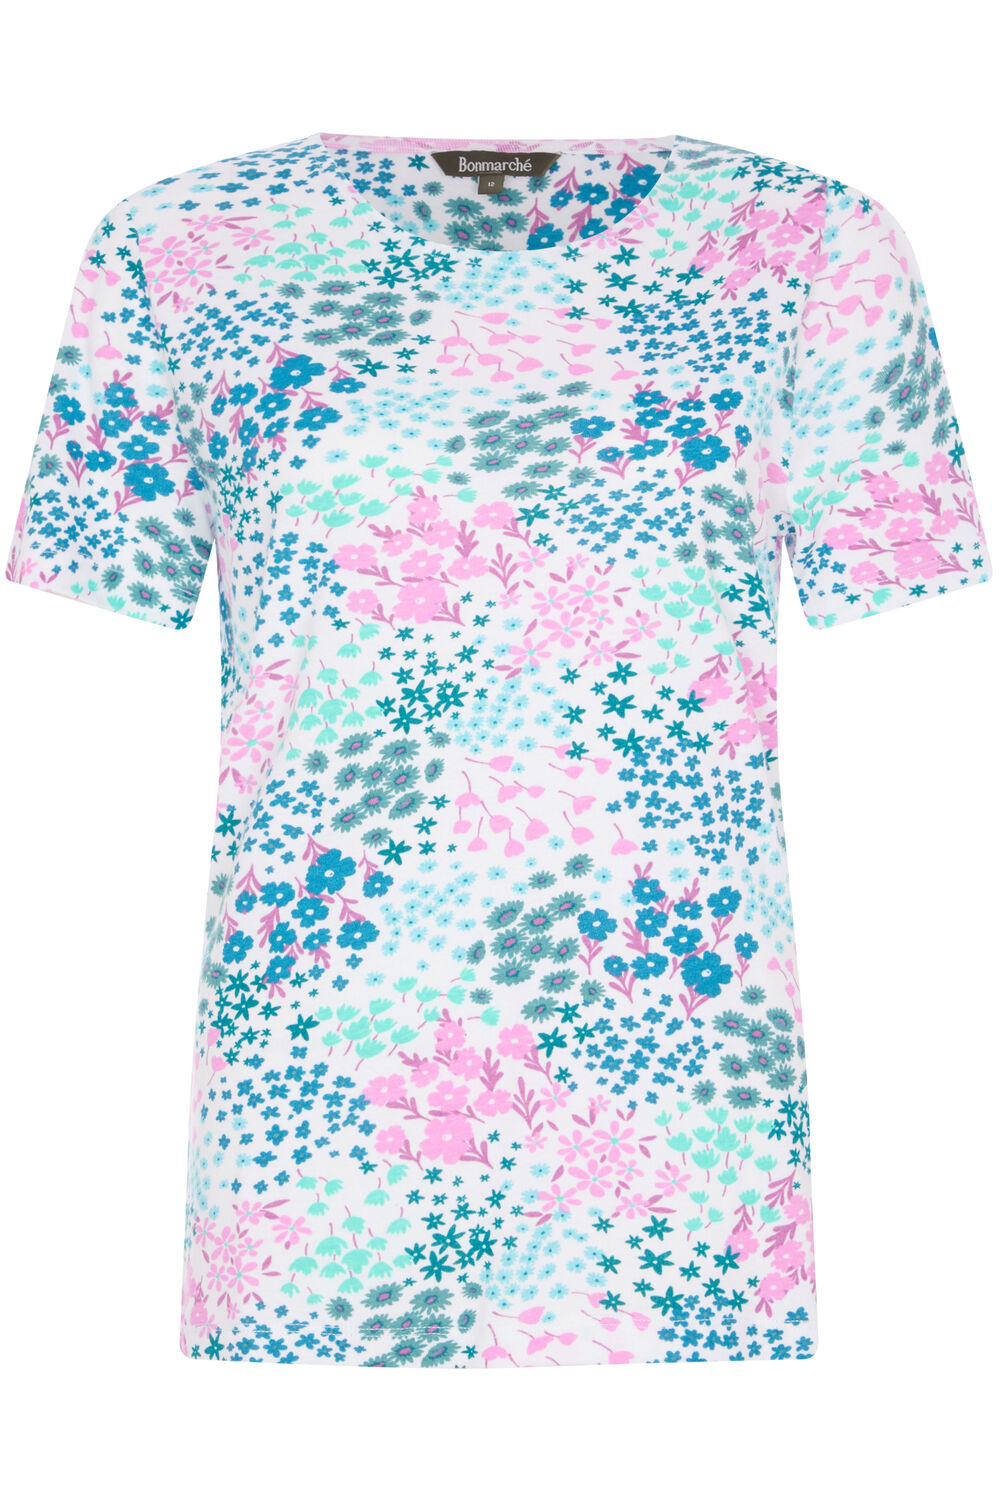 Bonmarche Ivory Short Sleeve Pressed Ditsy Print Scoop Neck T-Shirt, Size: 16